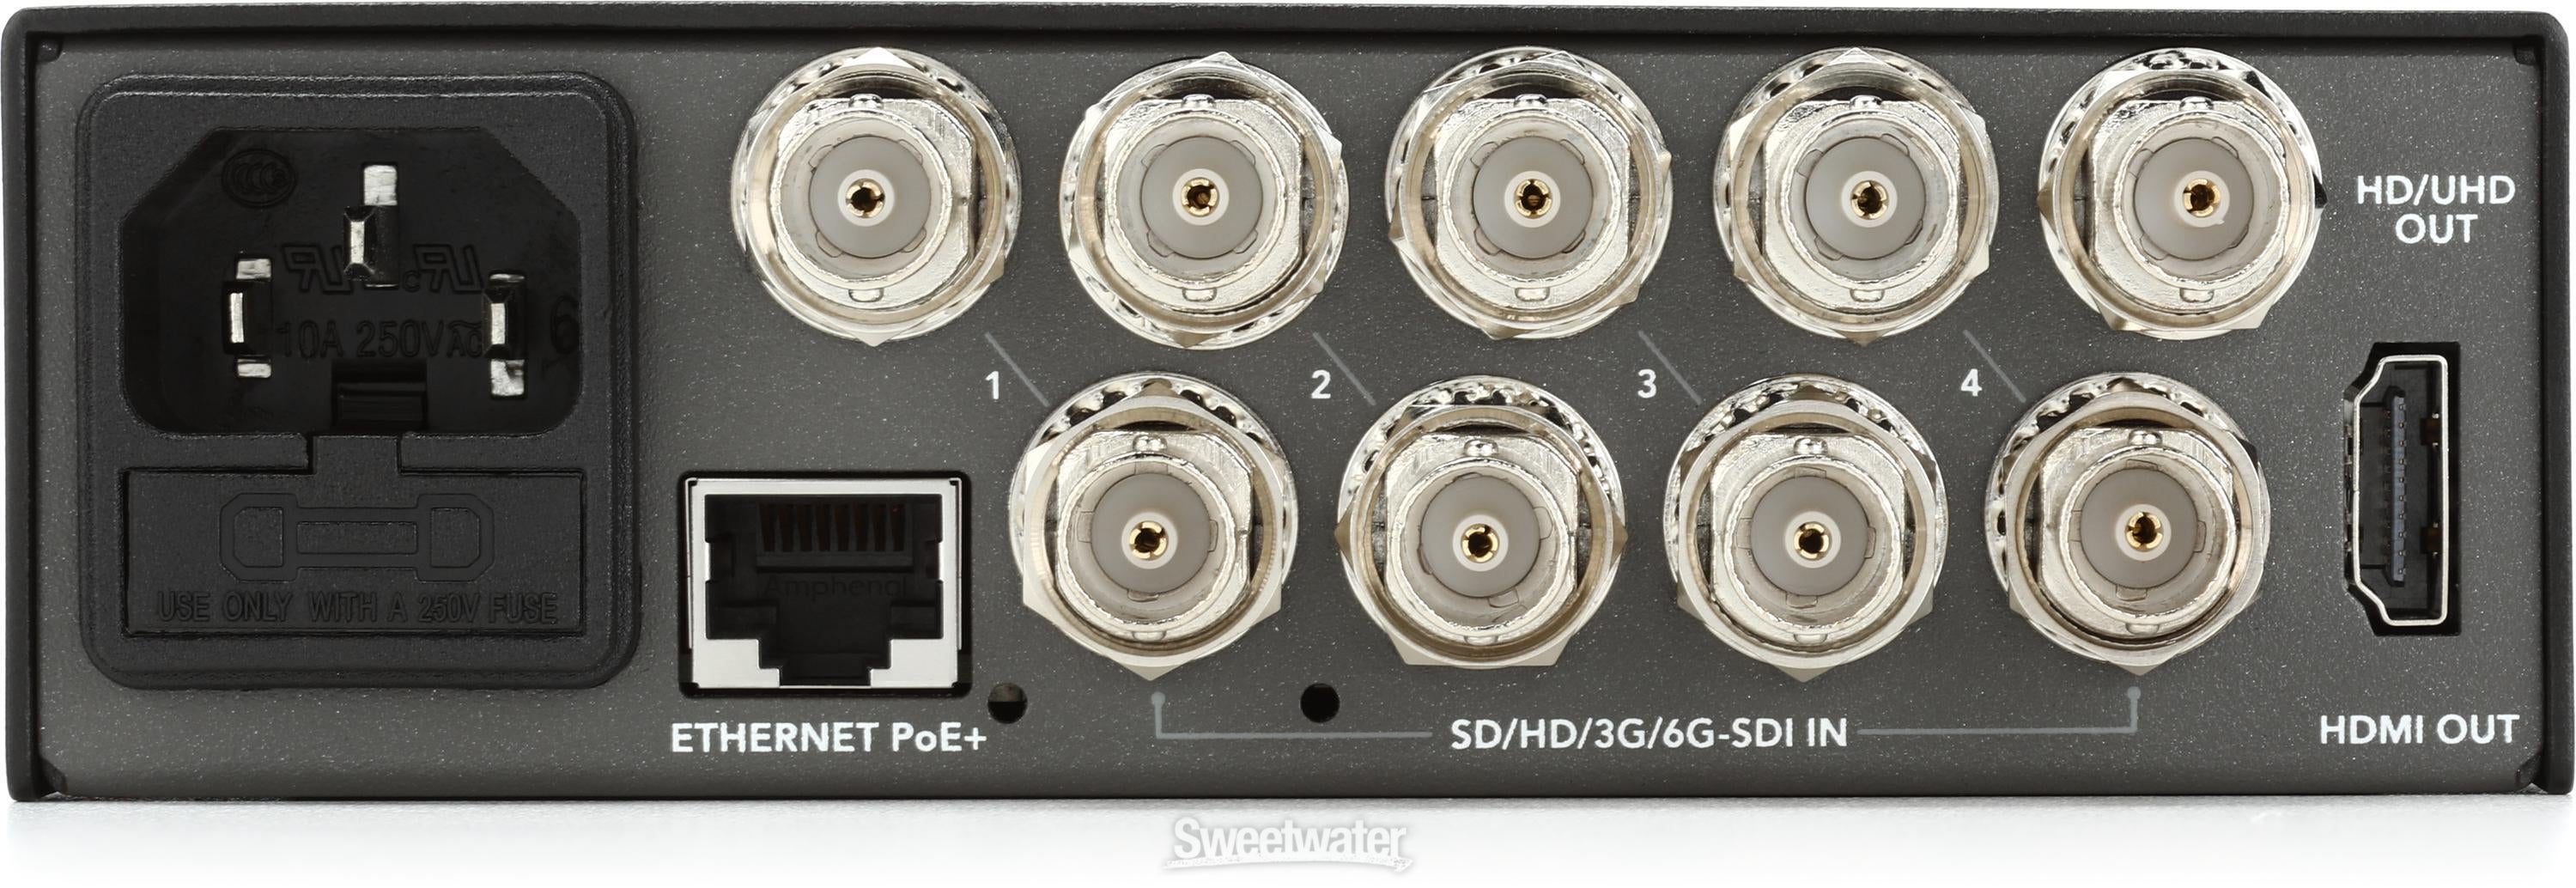 Blackmagic Design MultiView 4 Monitoring Box | Sweetwater